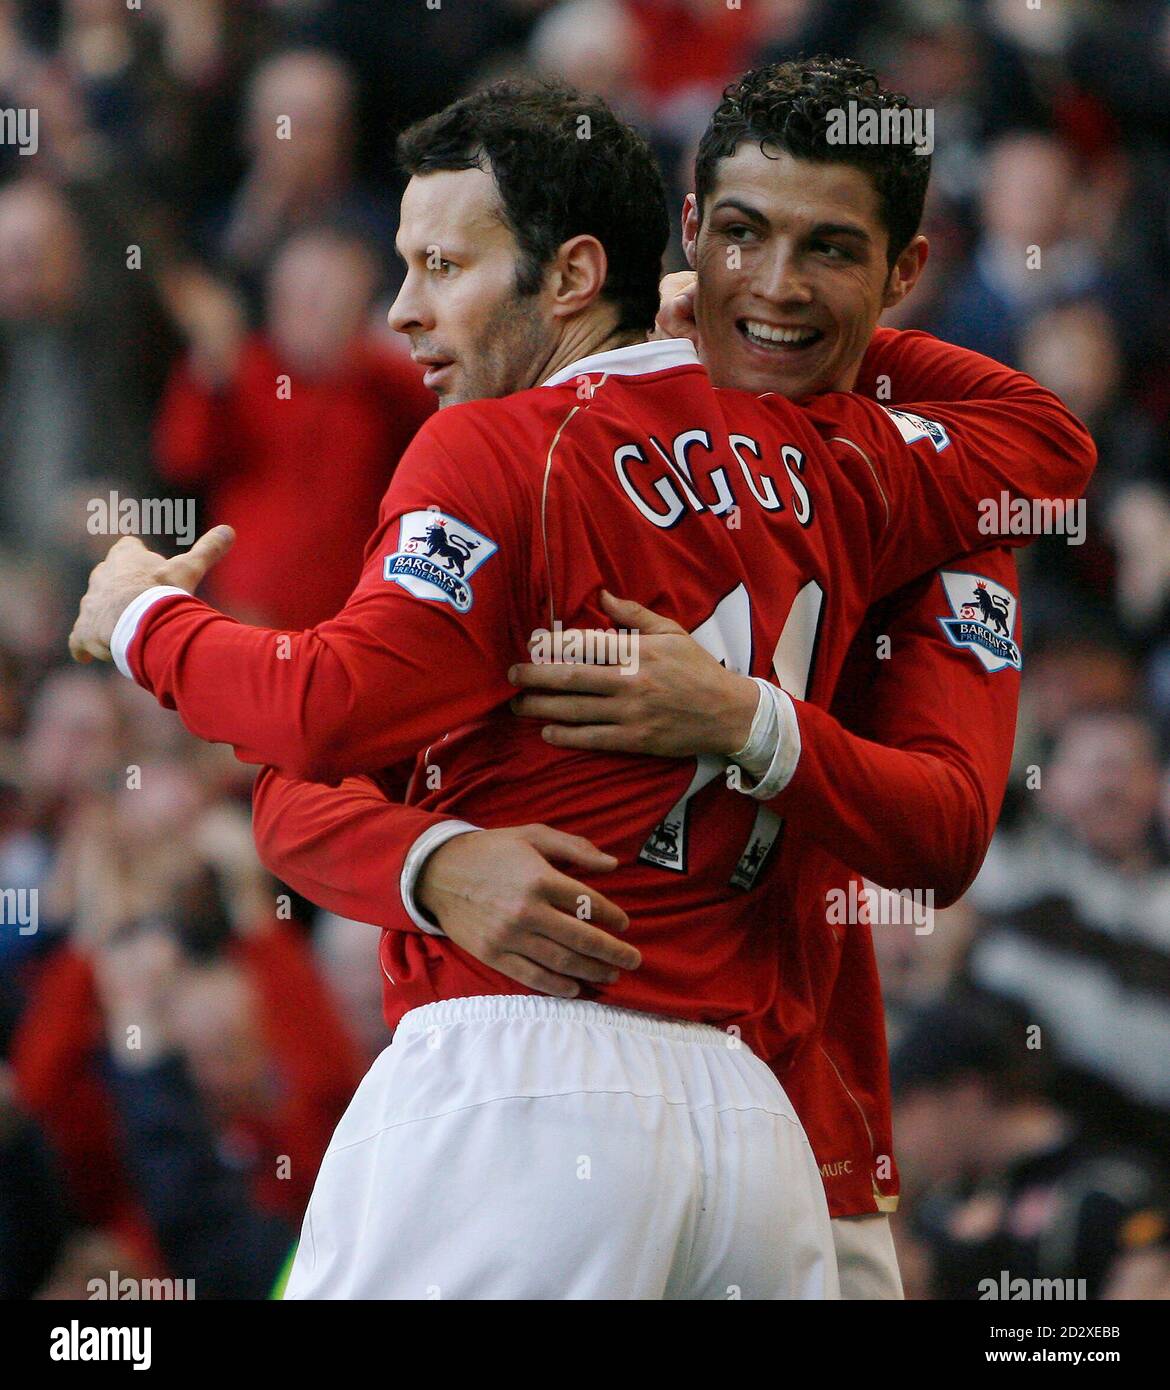 Manchester United's Cristiano Ronaldo (R) celebrates his goal with Ryan  Giggs during their English Premier League soccer match against Manchester  City at Old Trafford in Manchester December 9, 2006. NO ONLINE/INTERNET USE